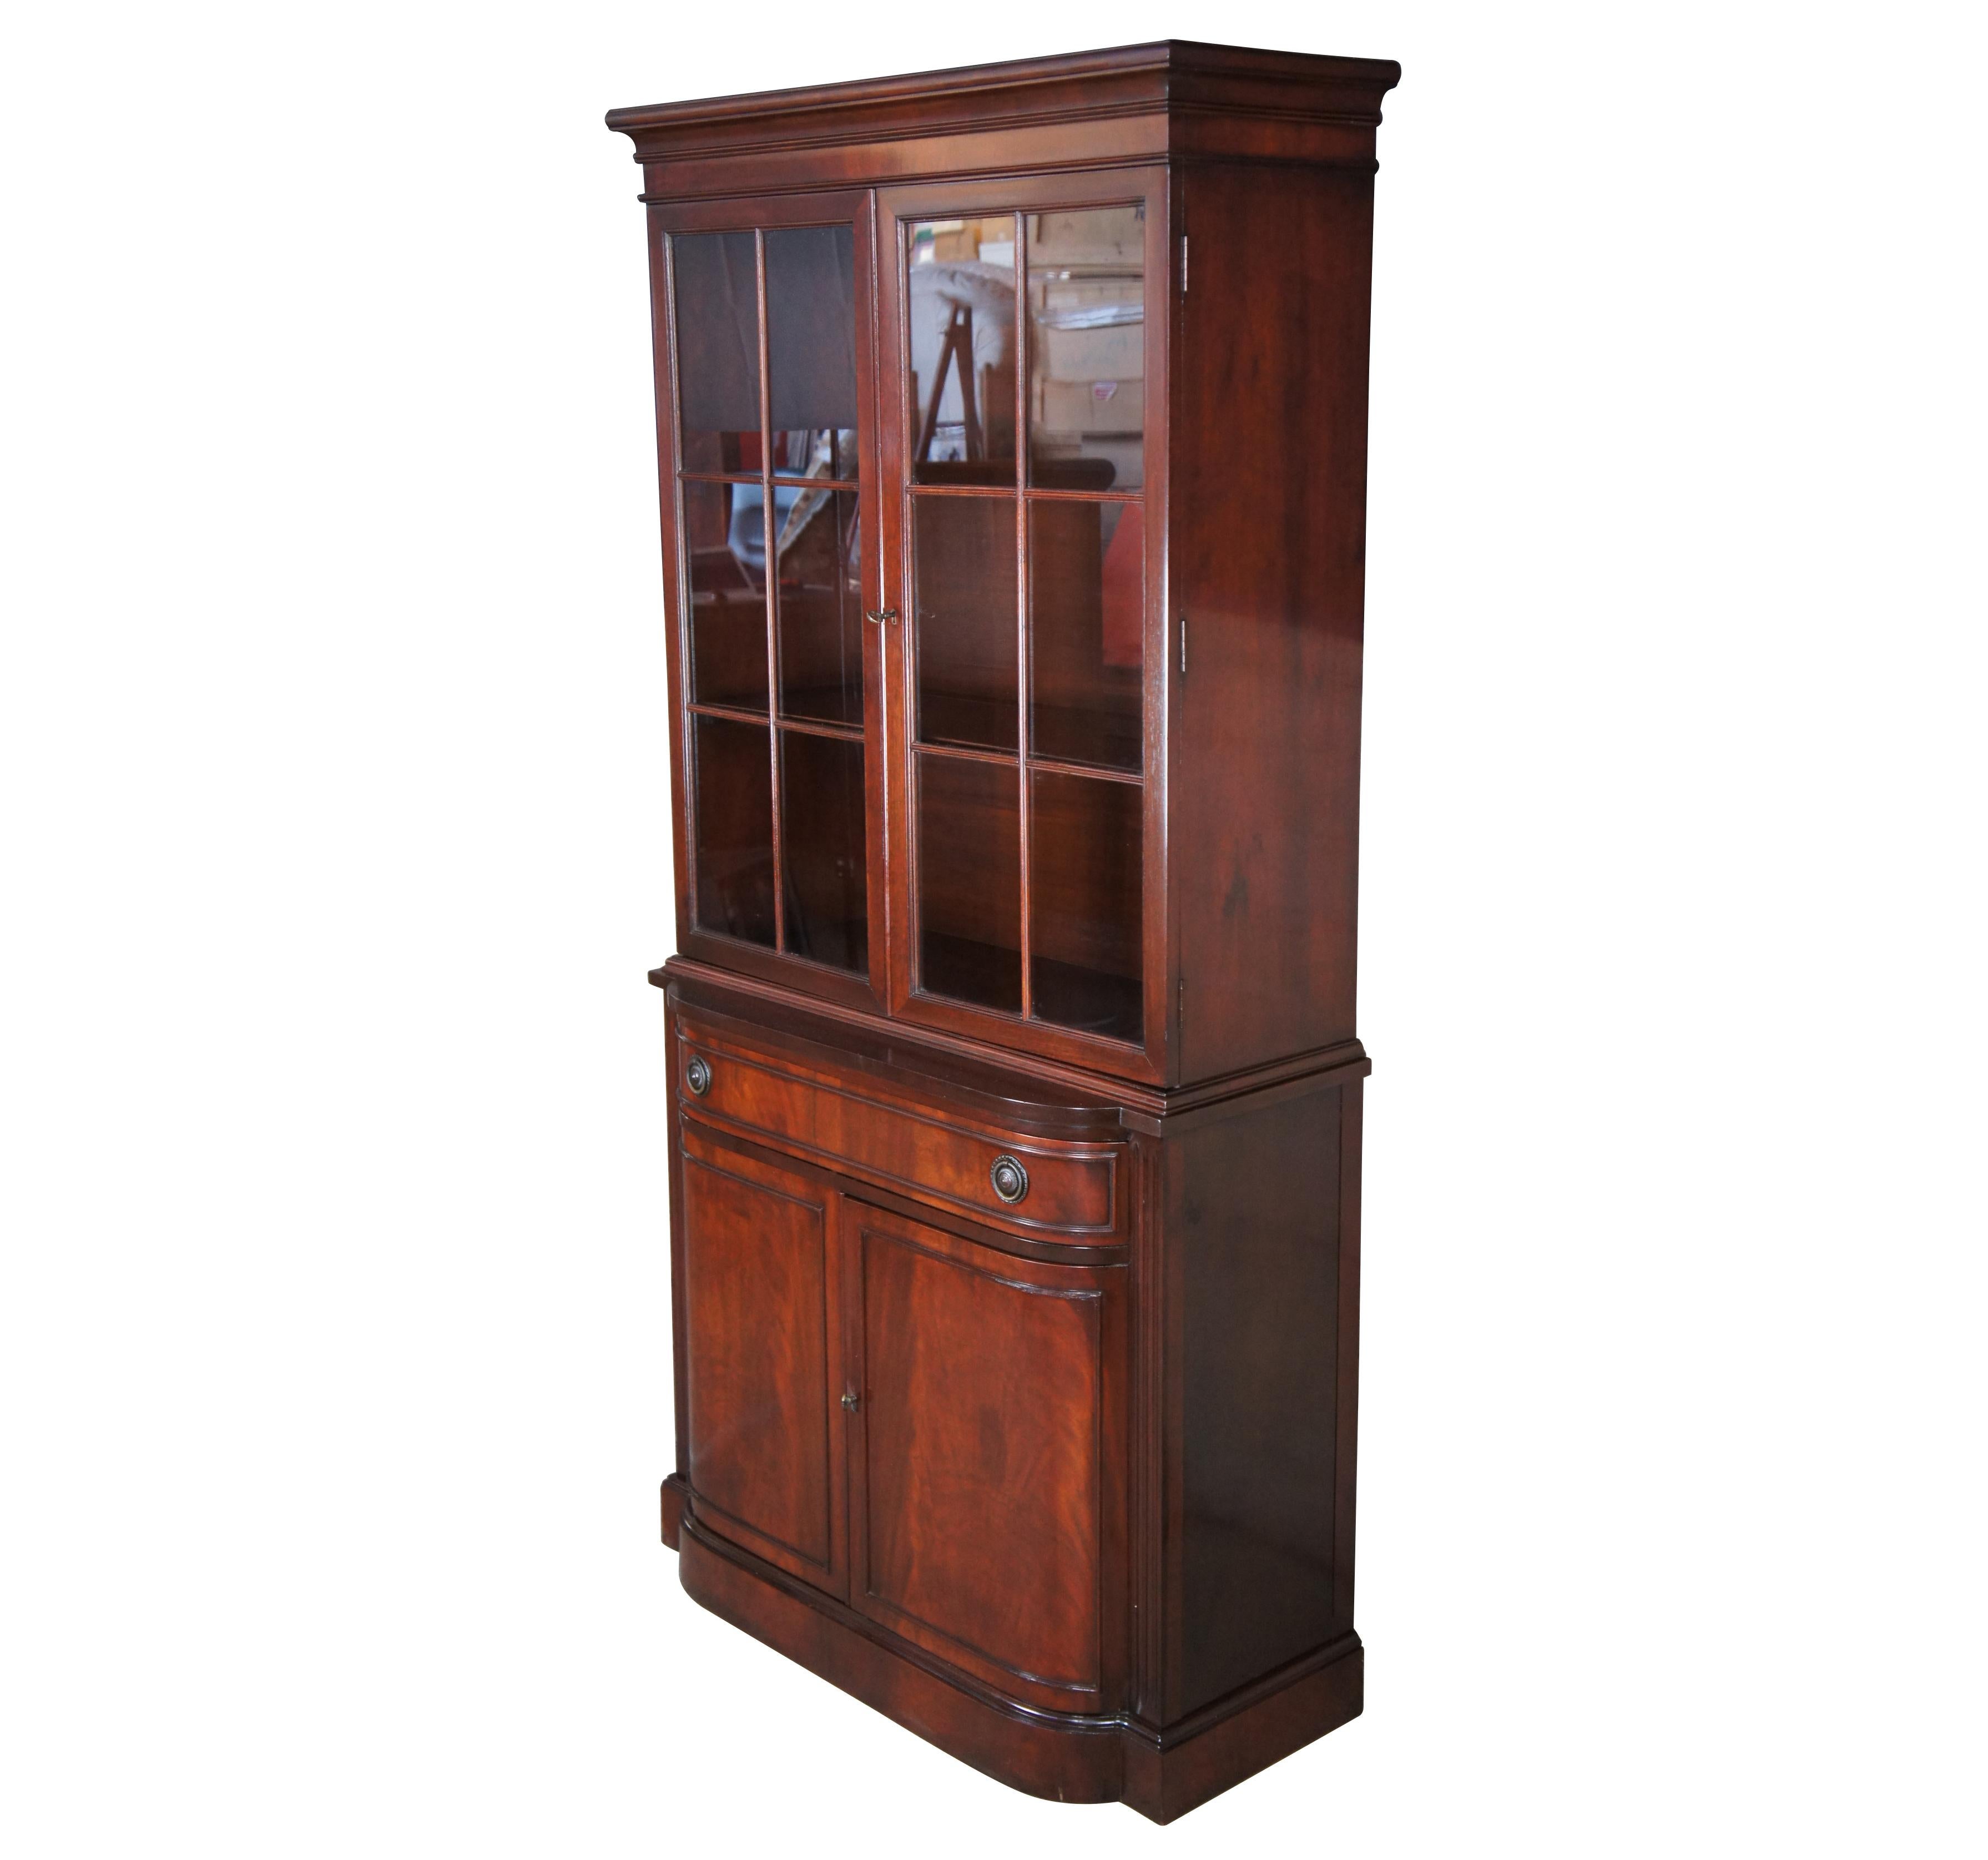 Vintage Drexel Georgian style bowfront china cabinet or cupboard, circa 1940s. Made of genuine mahogany featuring three upper shelves with plate grooves, over one drawer, and a lower cabinet. Lower cabinet and drawer fronts have a rich crotch /